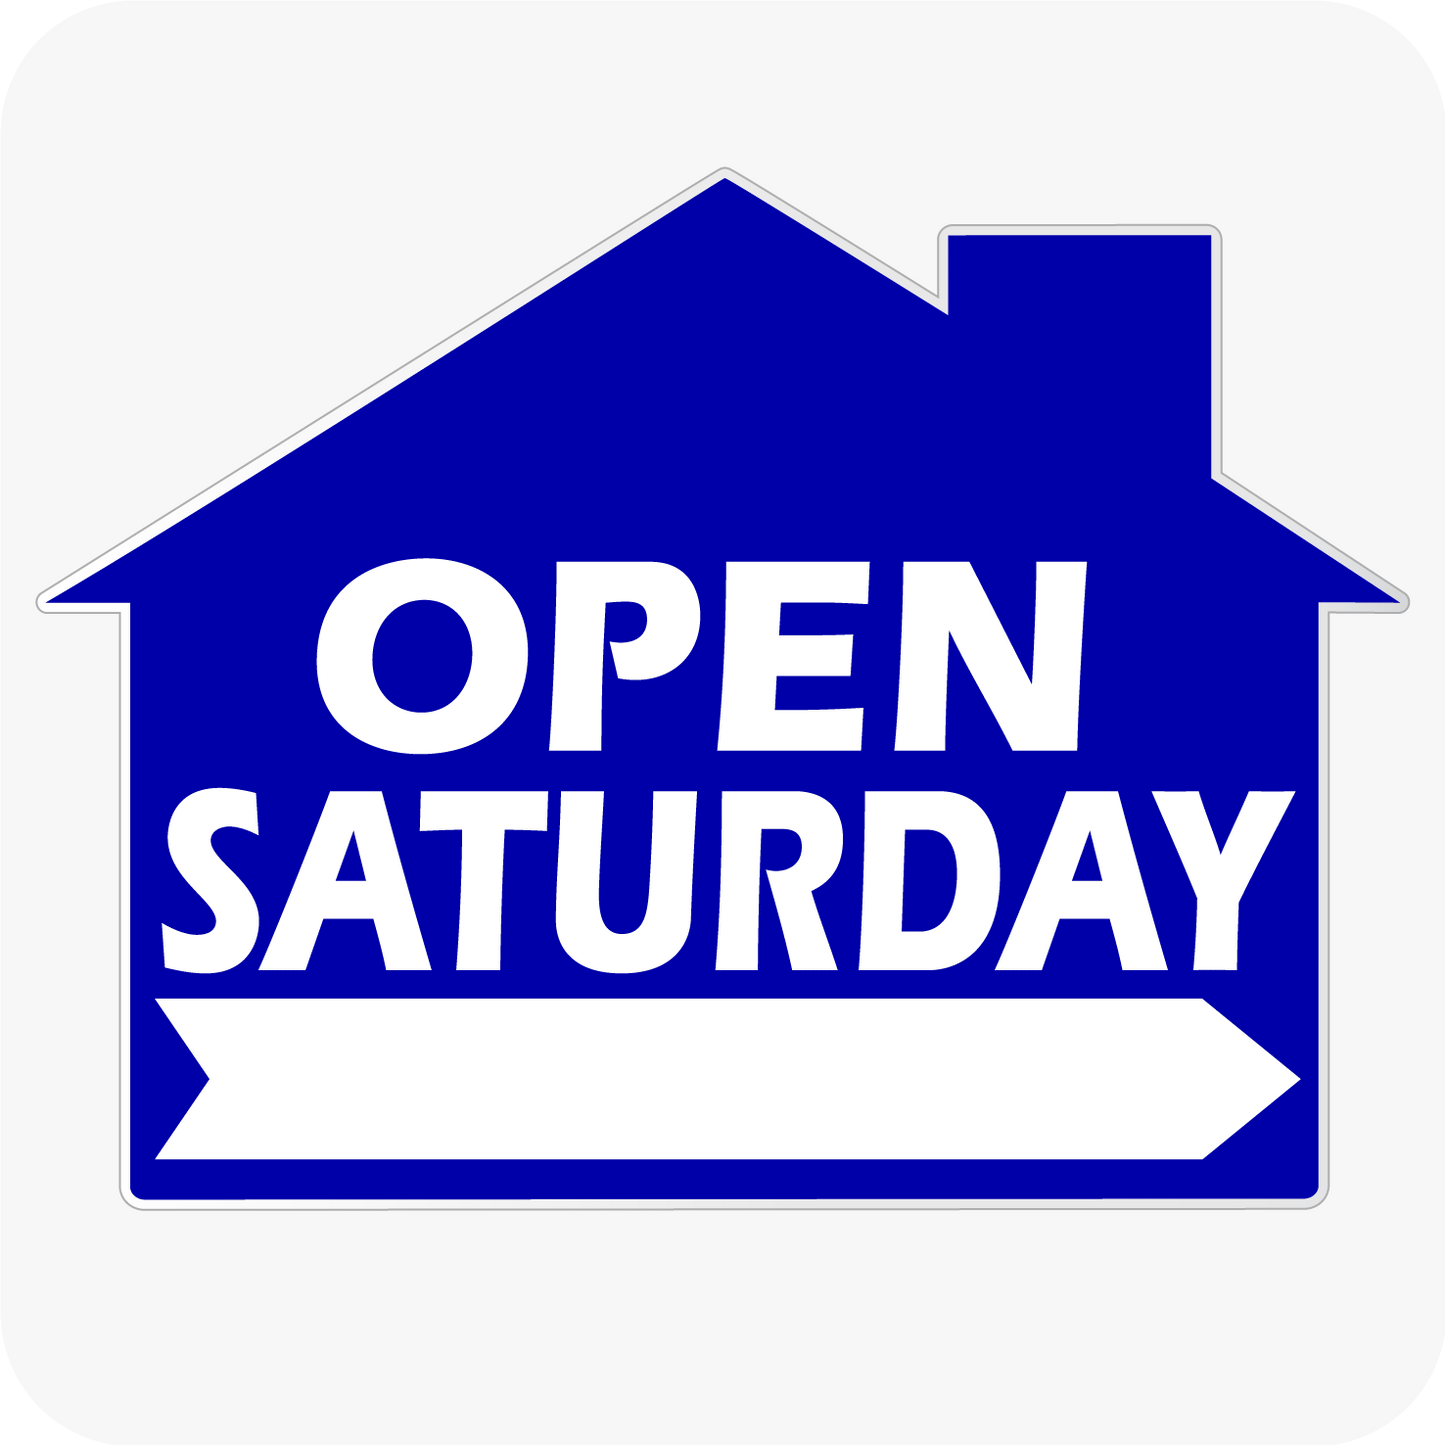 Open Saturday - House Shaped Sign 18 x 24 - Blue